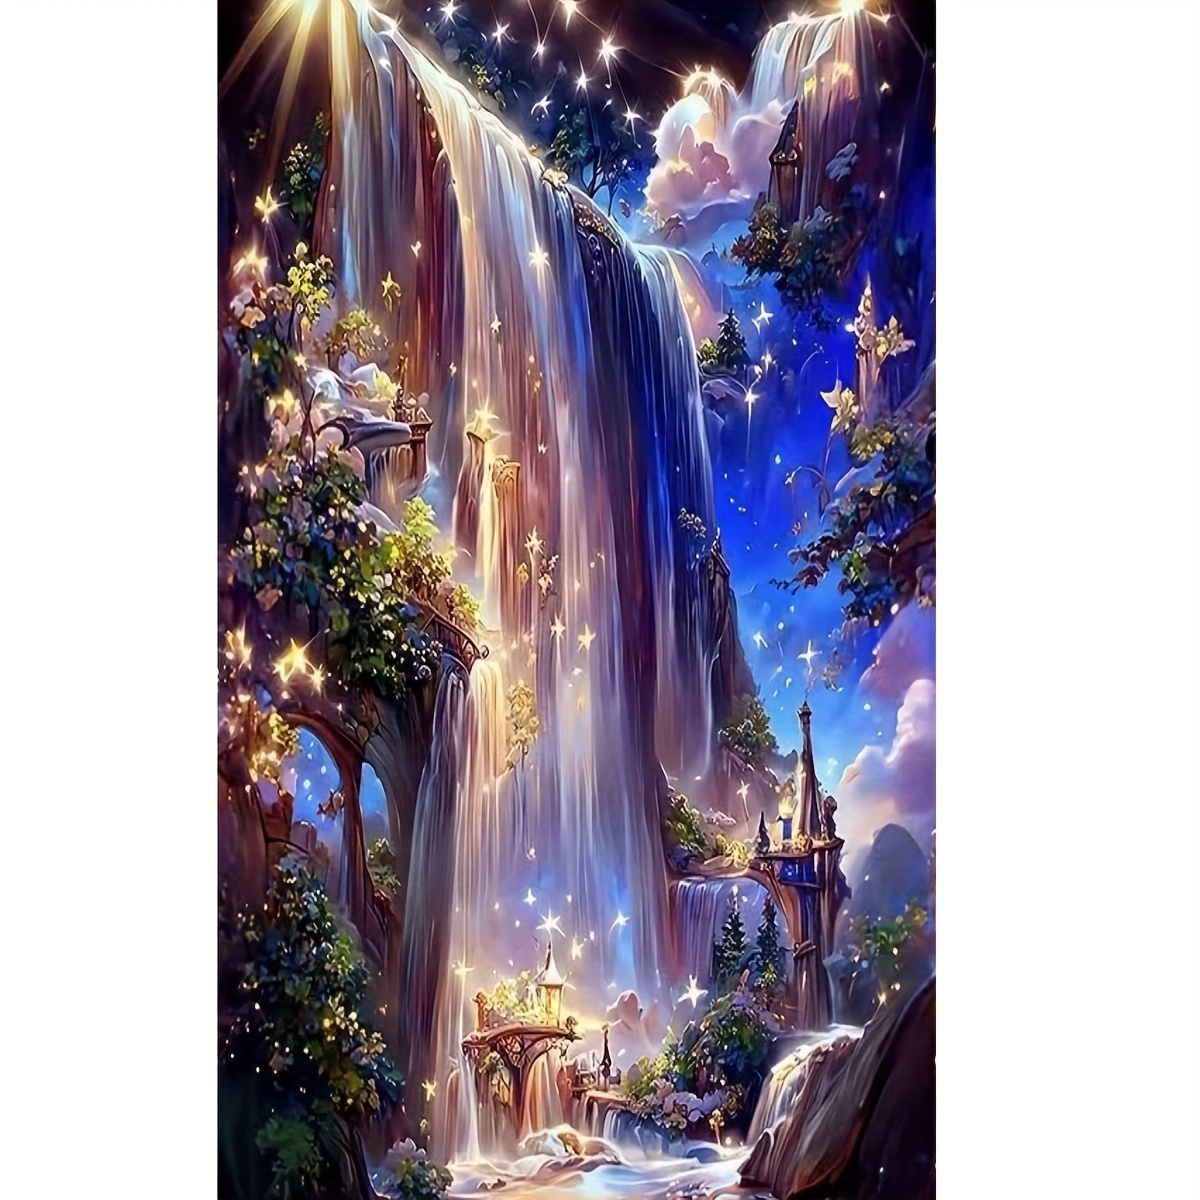 

Starry Sky Waterfall Diamond Art Painting Tools For Adults 5 D Diy Diamond Art Tools For Beginners With Round Drill Diamond Gems Painting Art Decor Gifts For Home Wall